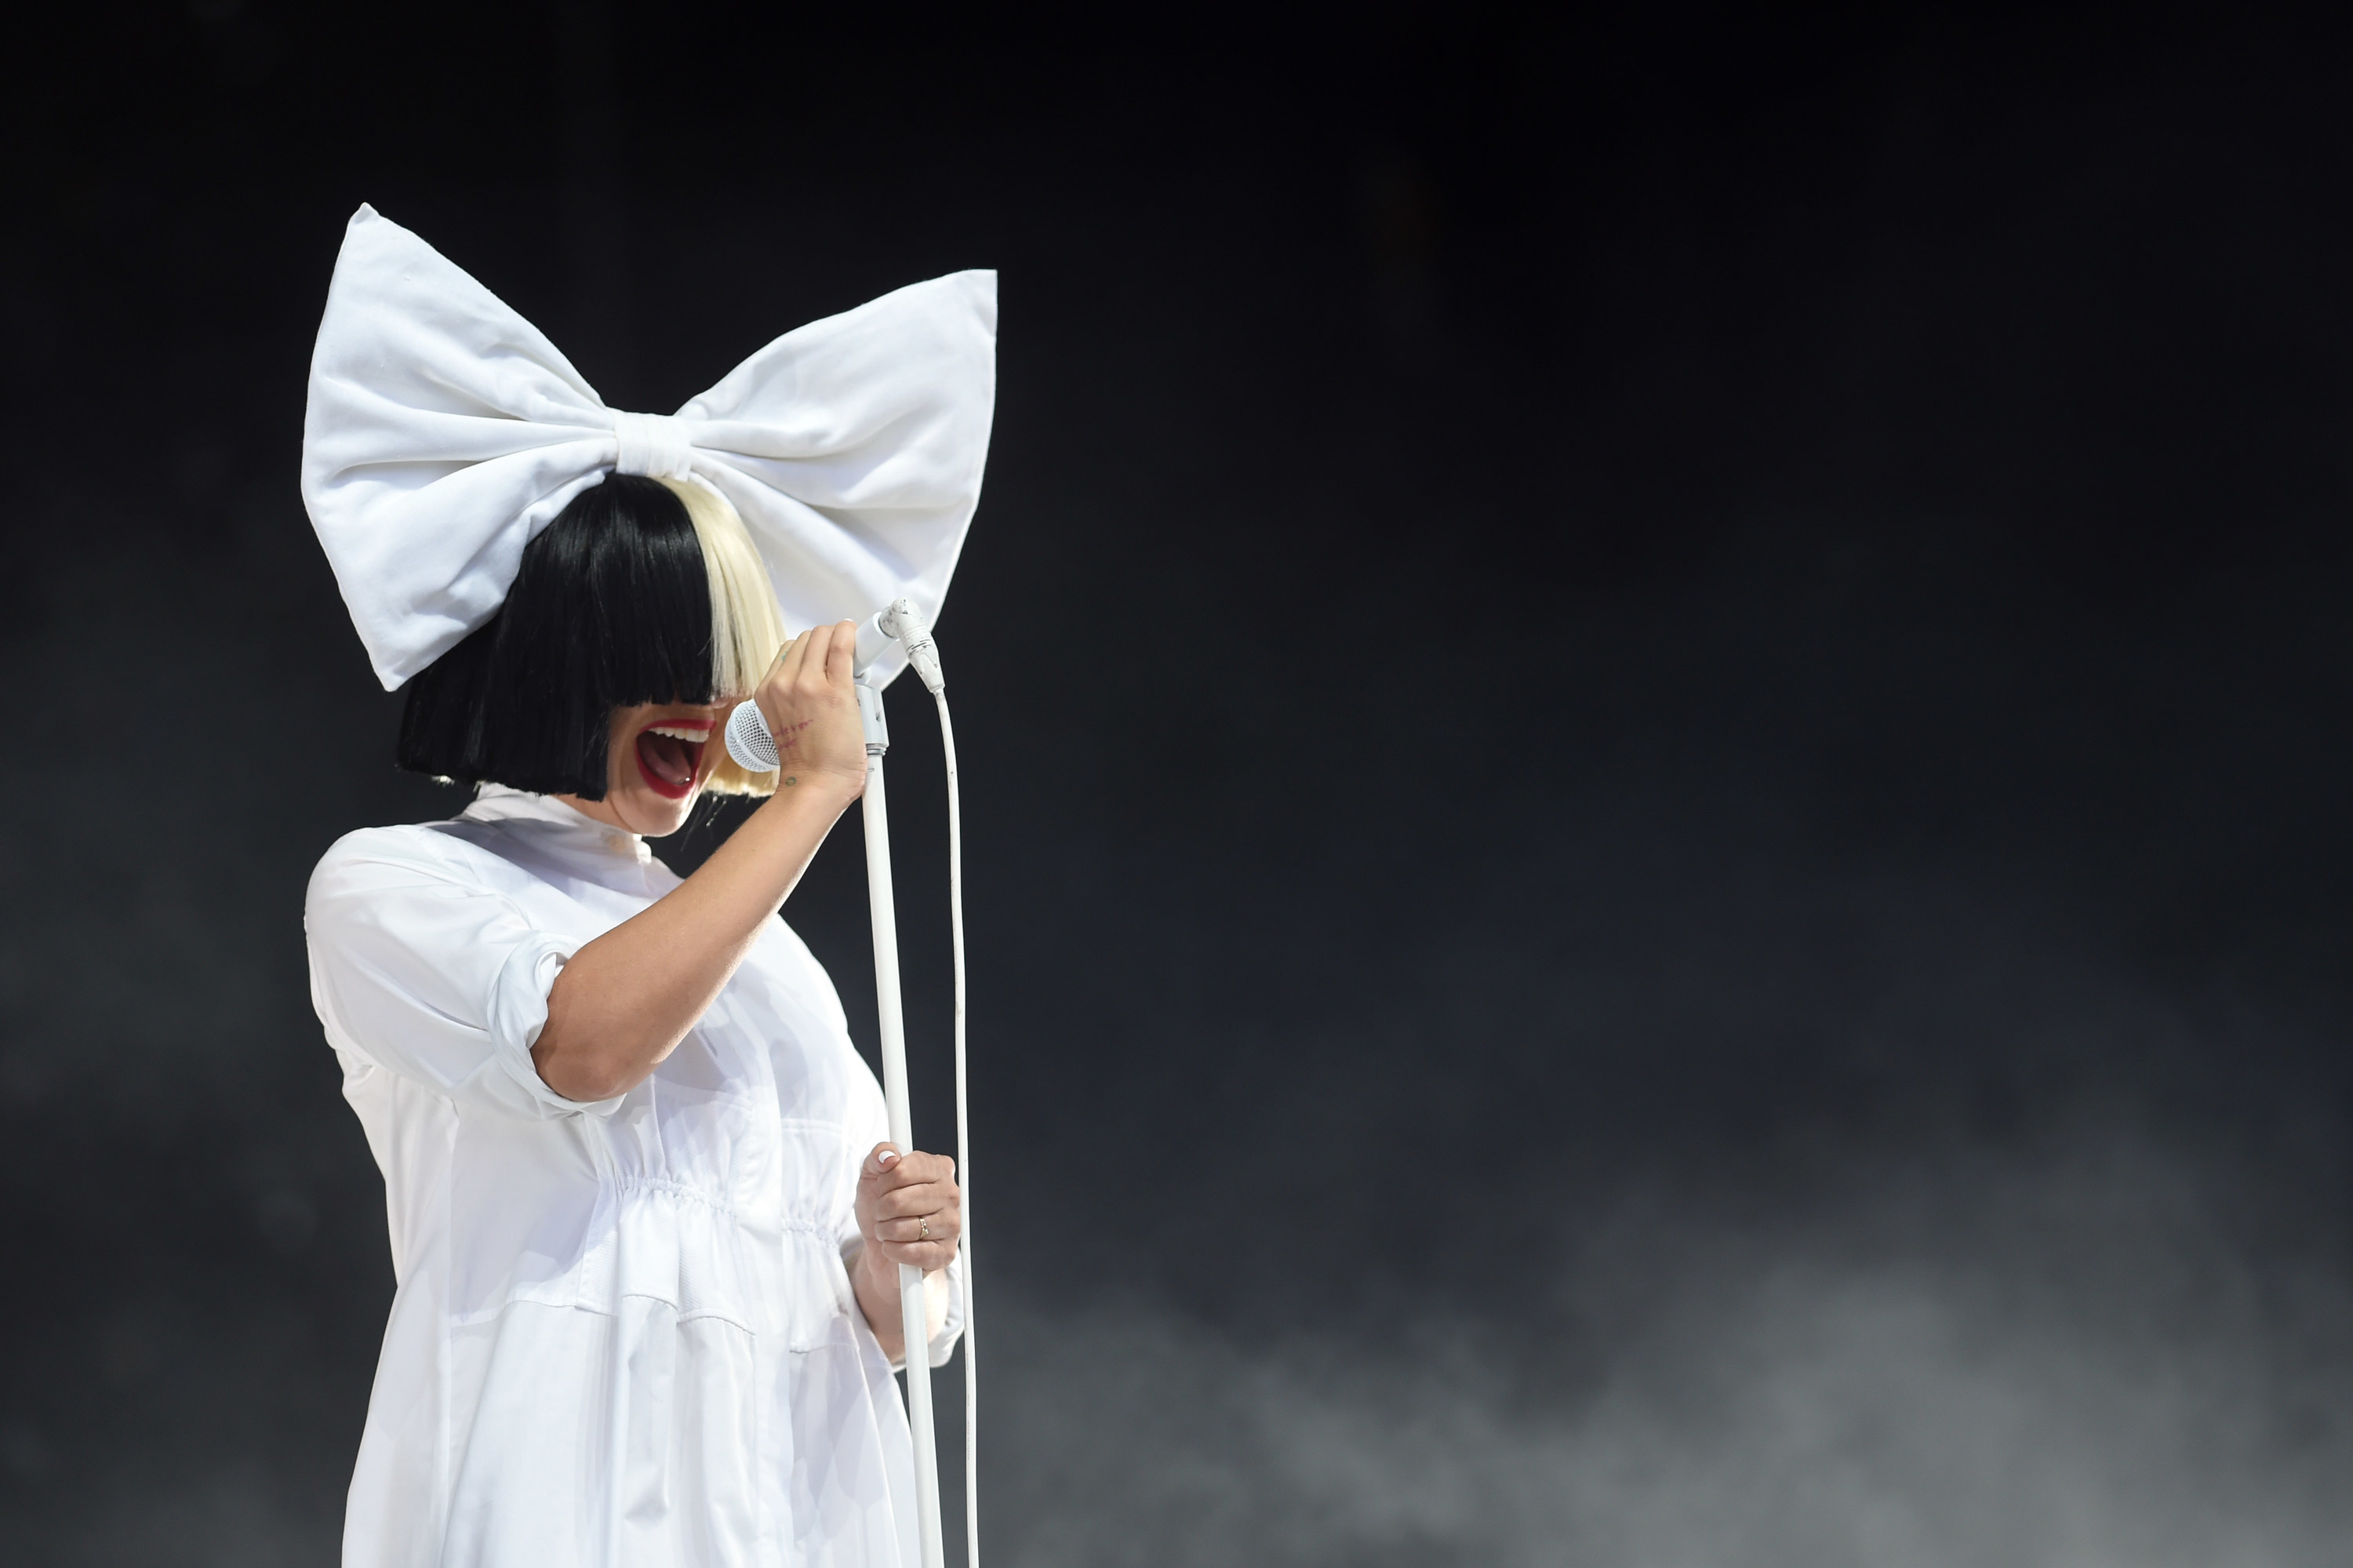 Sia, with her wig on, performs at V Festival at Hylands Park on August 20, 2016 in Chelmsford, England